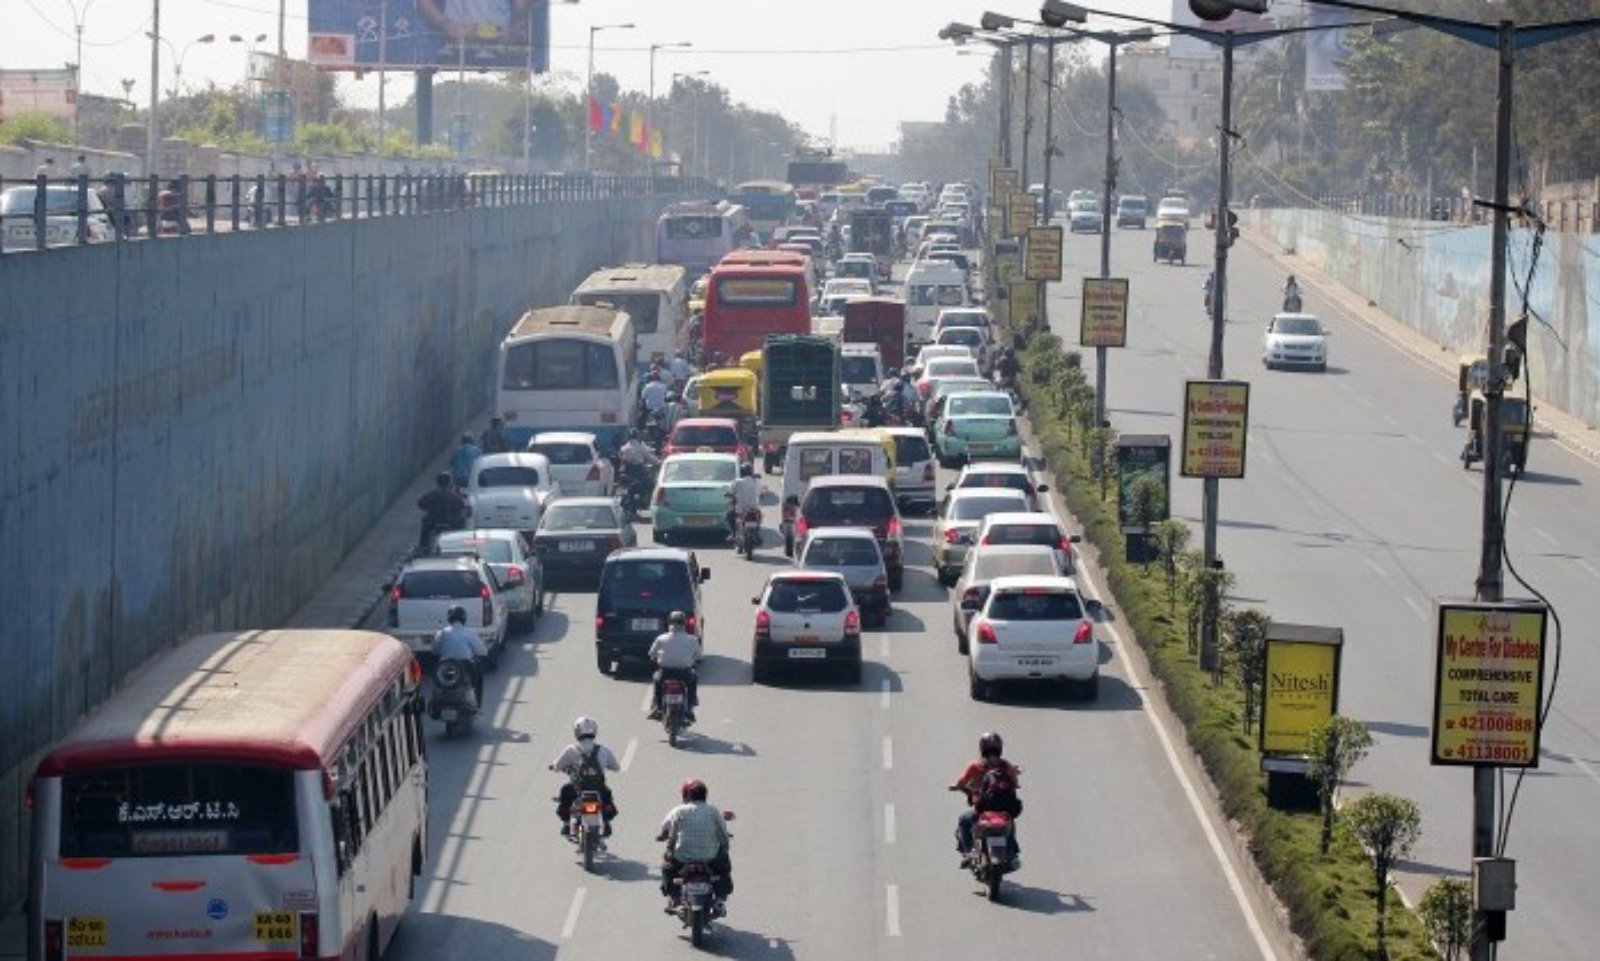 Agentaly - Israeli firm to fund, build Peripheral Ring Road in three years  https://www.newindianexpress.com/cities/bengaluru/2021/feb/20/israeli-firmto-fund-build- peripheral-ring-road-in-three-years-2266402.html #bangalore #news  #realestate #prr ...